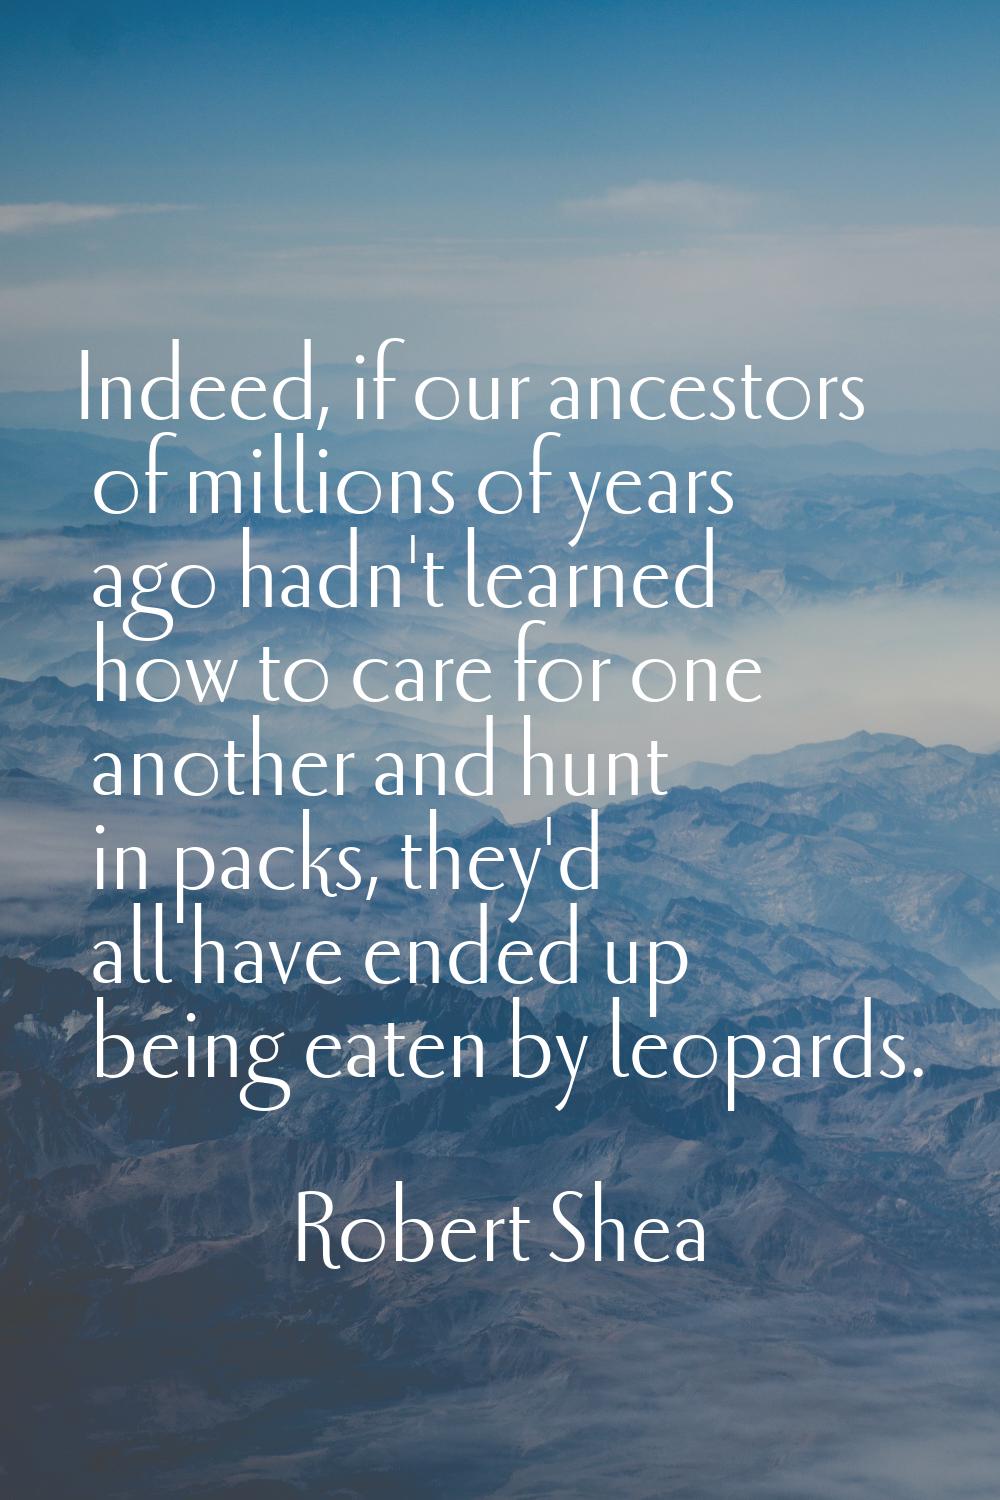 Indeed, if our ancestors of millions of years ago hadn't learned how to care for one another and hu